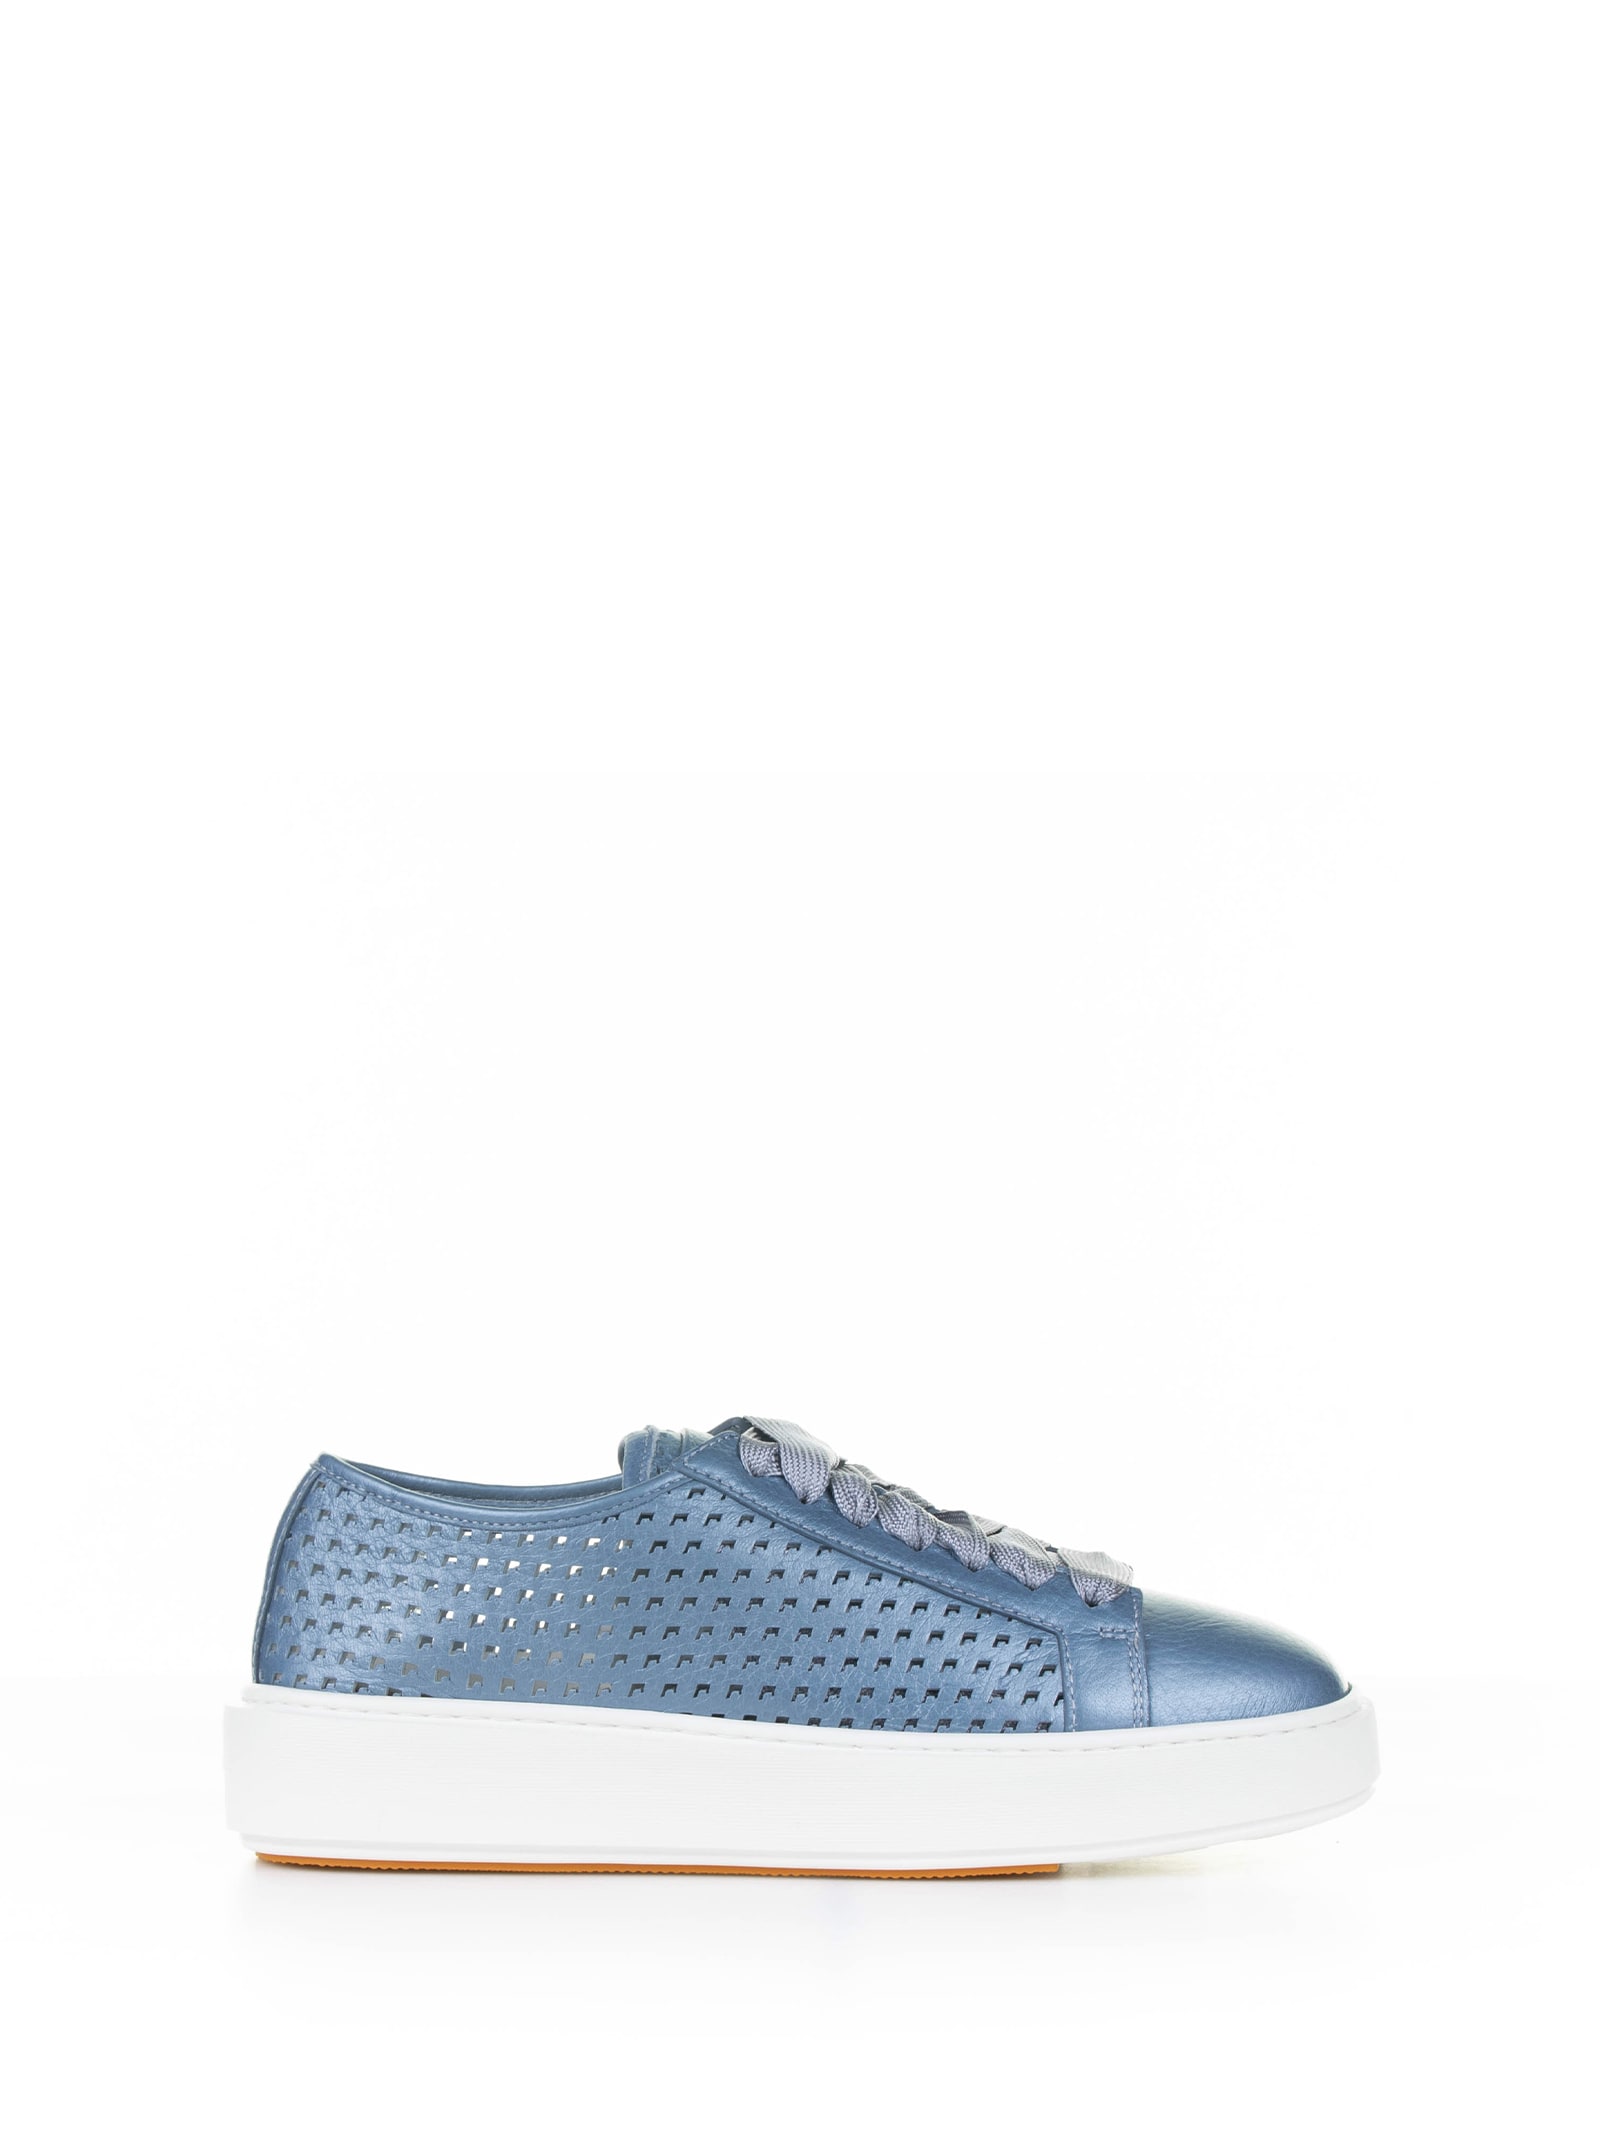 Light Blue Sneaker In Laminated Perforated Leather